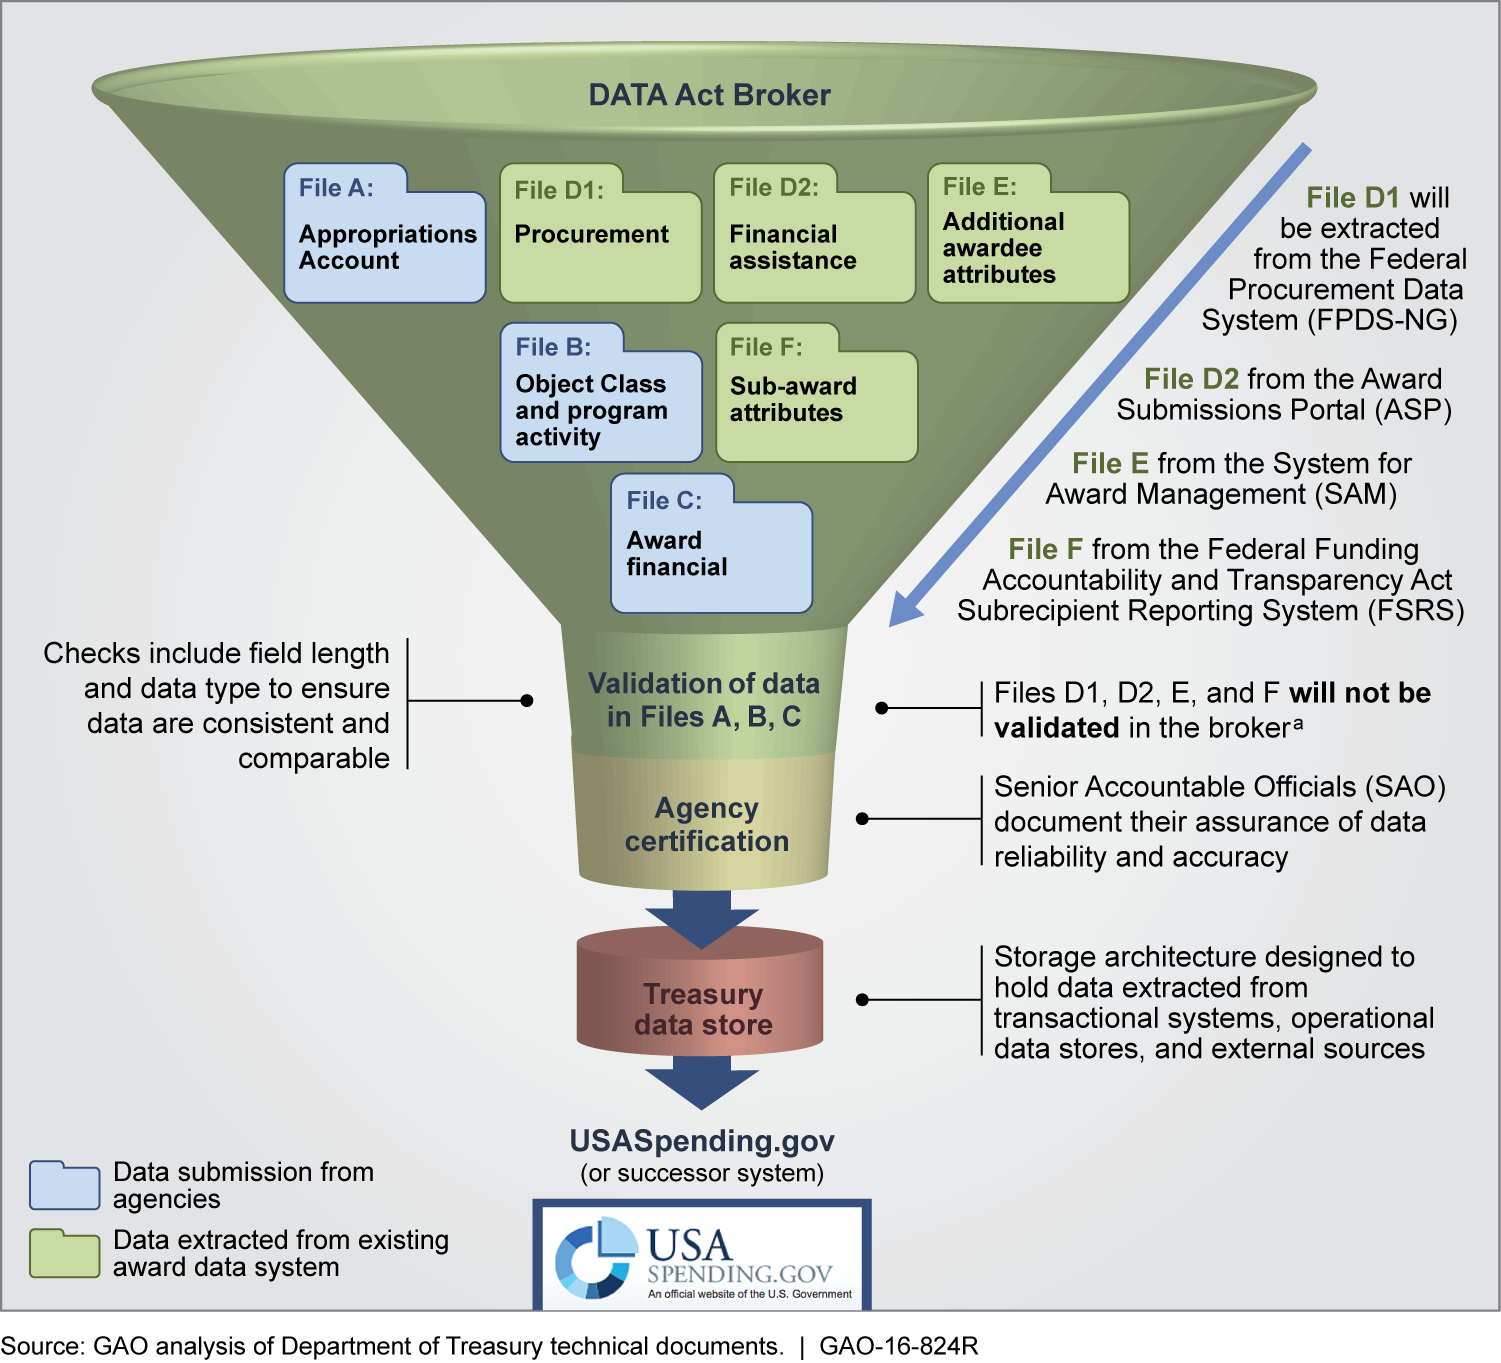 Figure 1: Operation of the Data Act Broker System